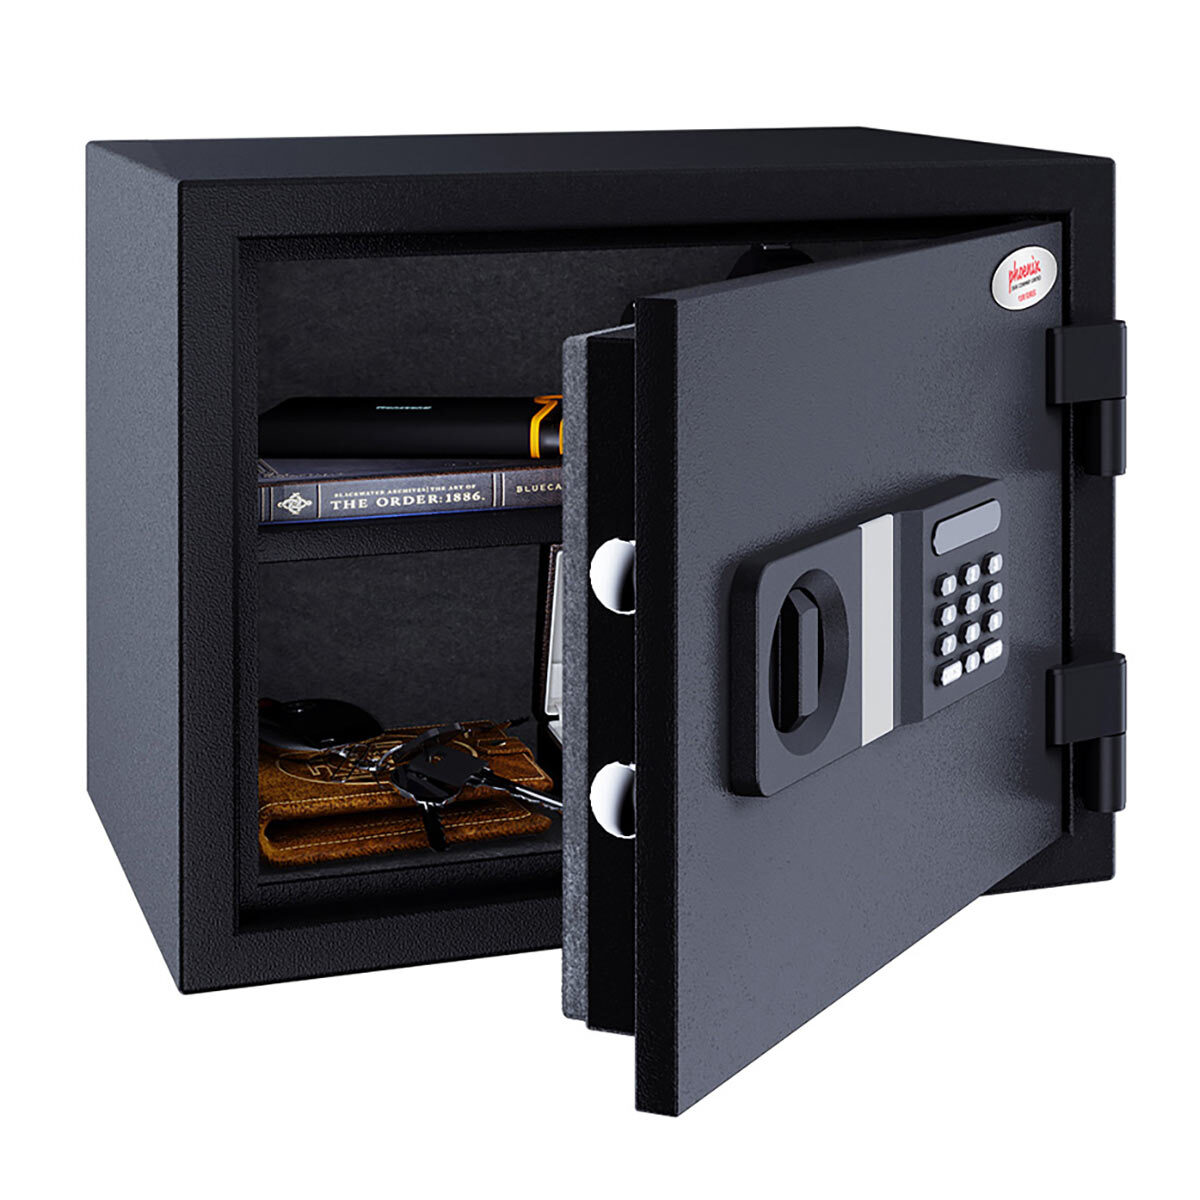 Cut out image of safe on white background with door open